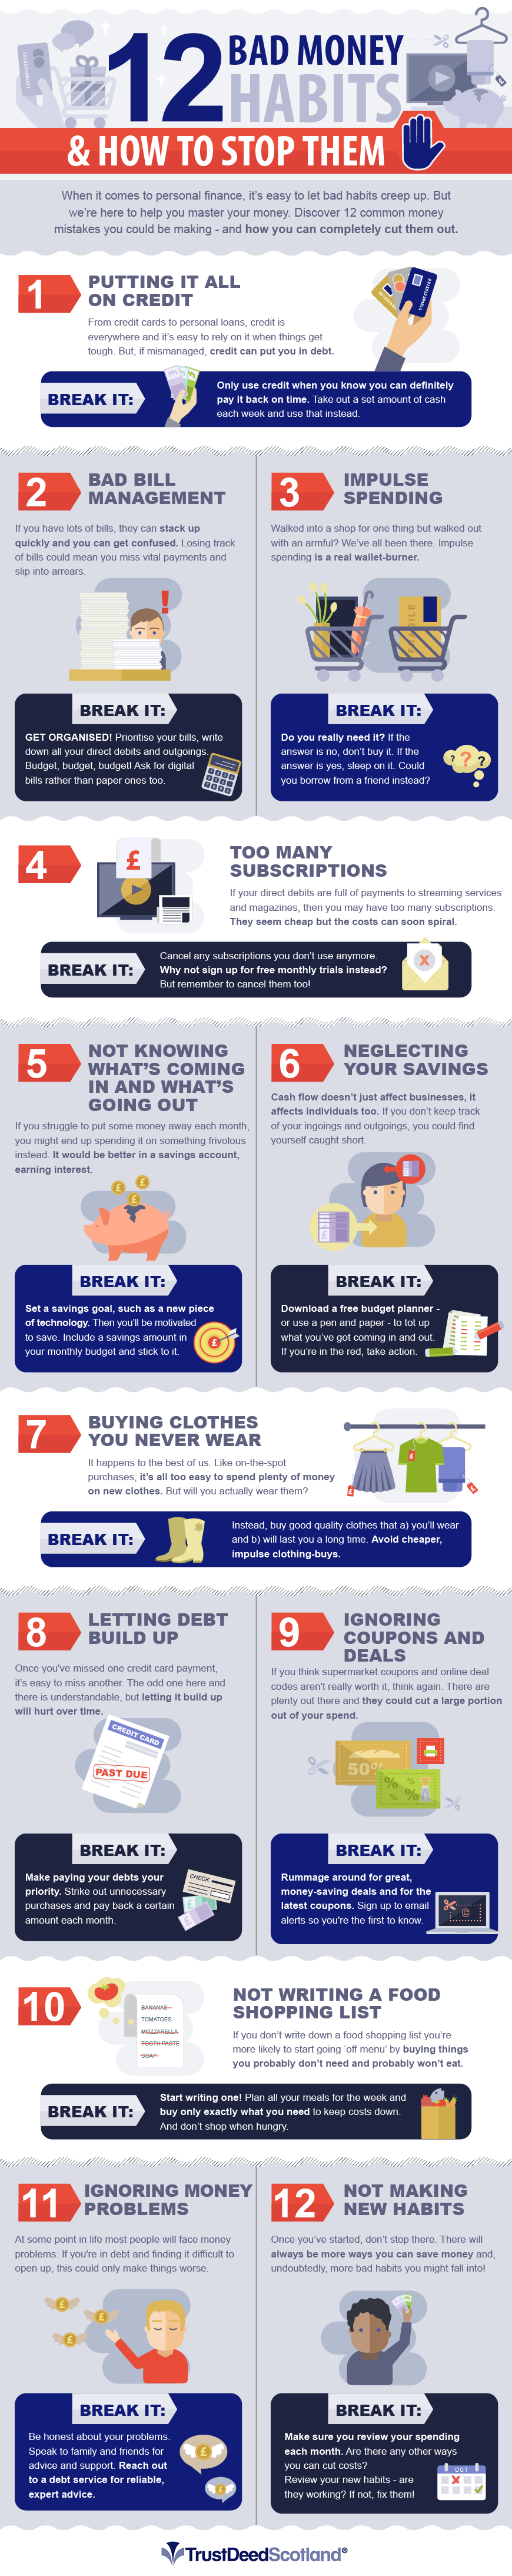 12 Bad Money Habits And How To Stop Them - #infographic